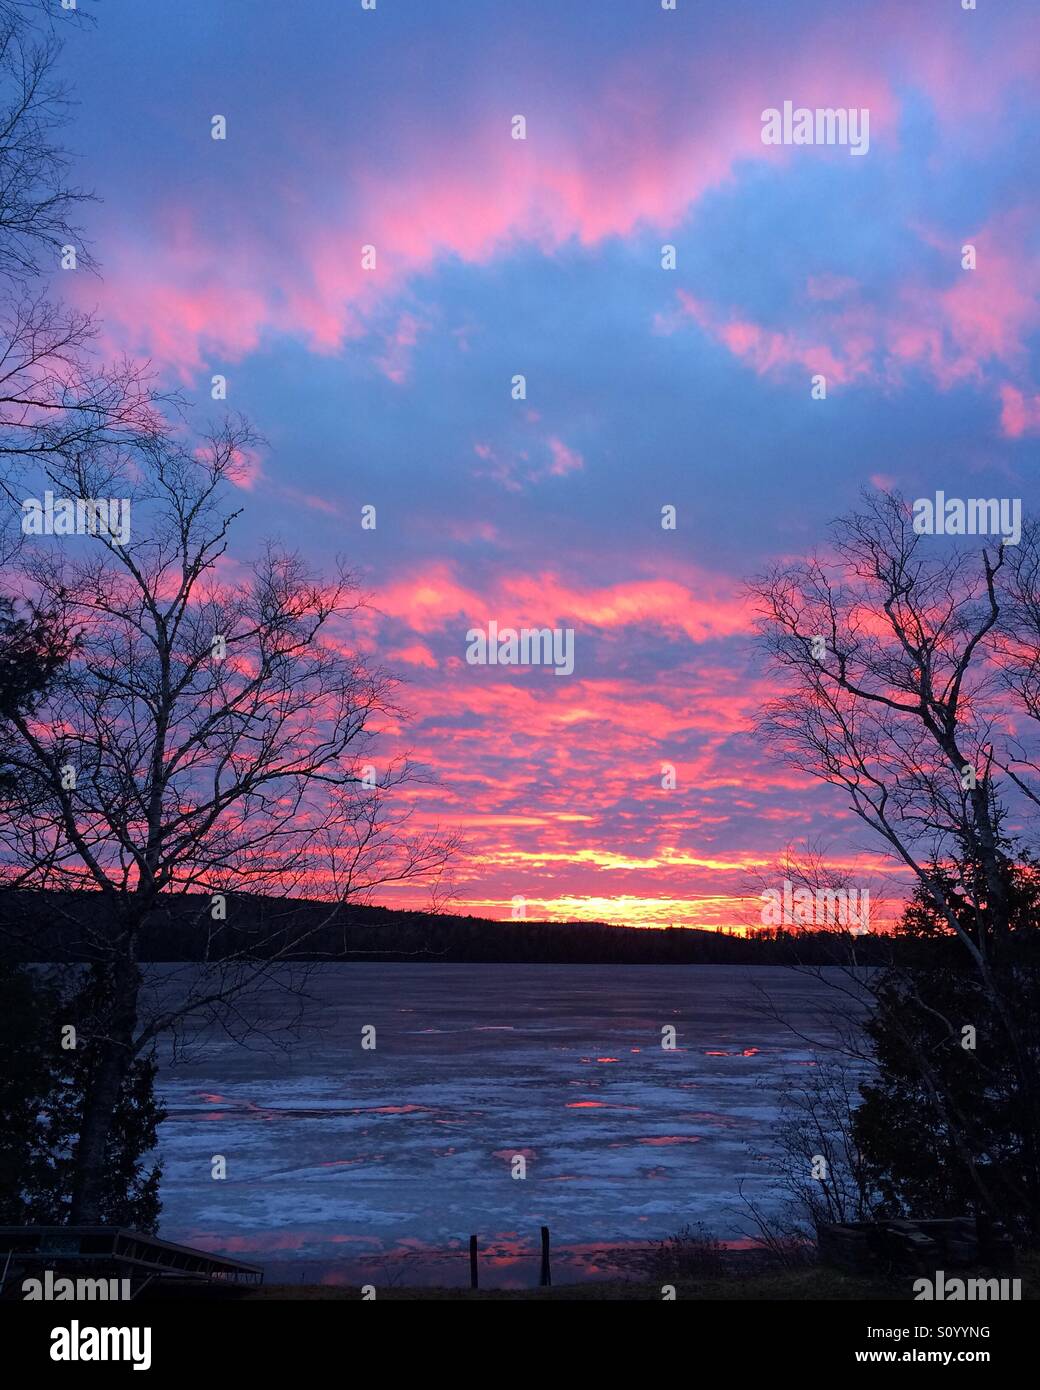 Pink sky at night, sailors' delight. Pink clouds reflecting on the pools of water on top of the ice on a northern Maine lake in May. Stock Photo